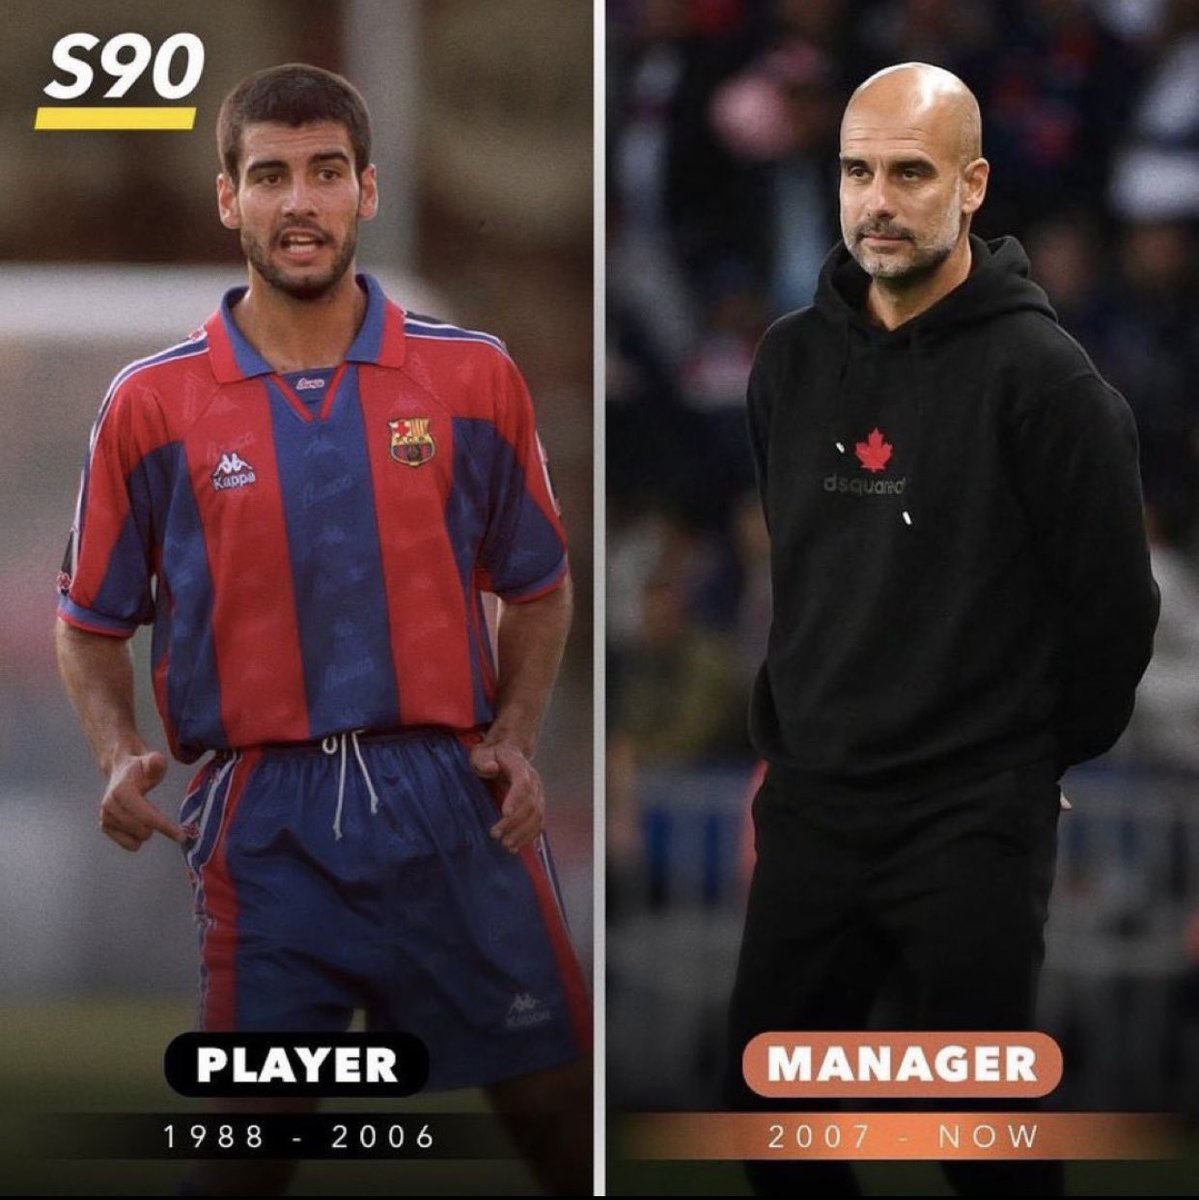 Former footballers currently top coaches. A thread 🧵 

1. Pep Guardiola